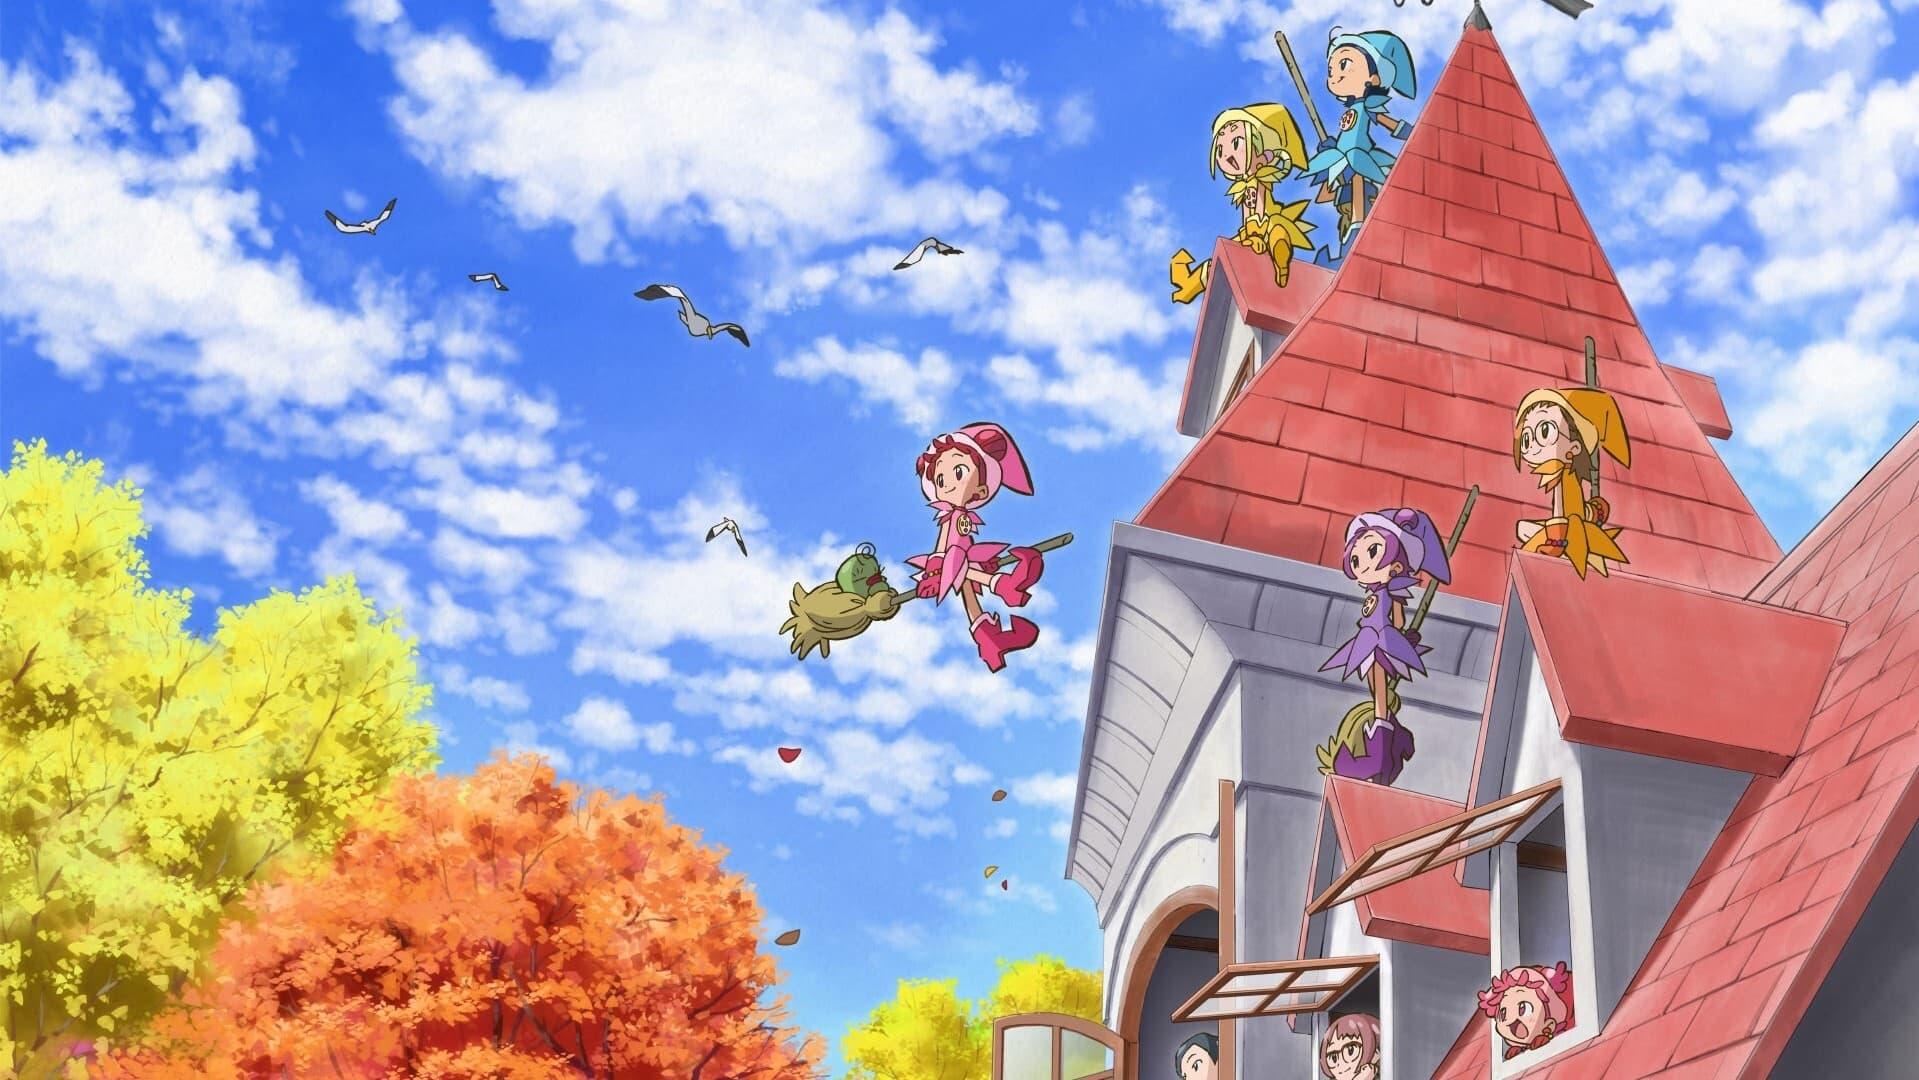 Looking for Magical Doremi backdrop